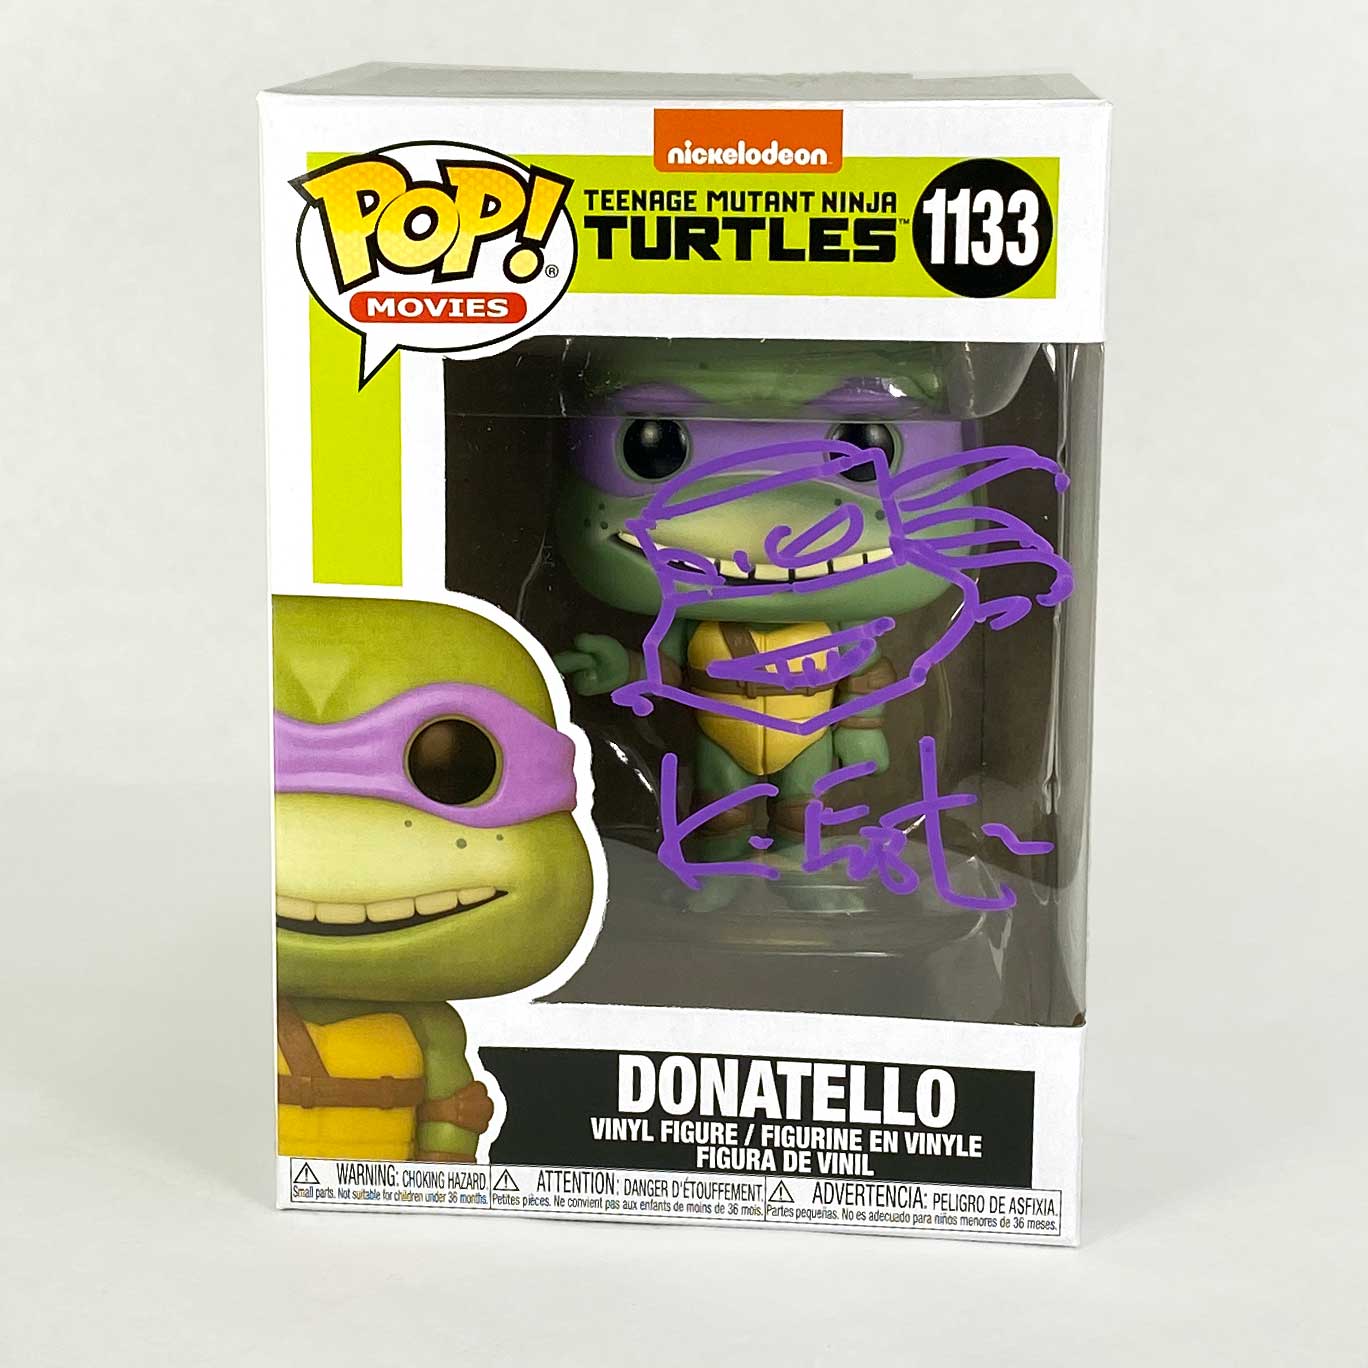 Slightly Damaged, Funko Pop Movies Series – TMNT Exclusive Donatello #1133 – Signed with Head Sketch